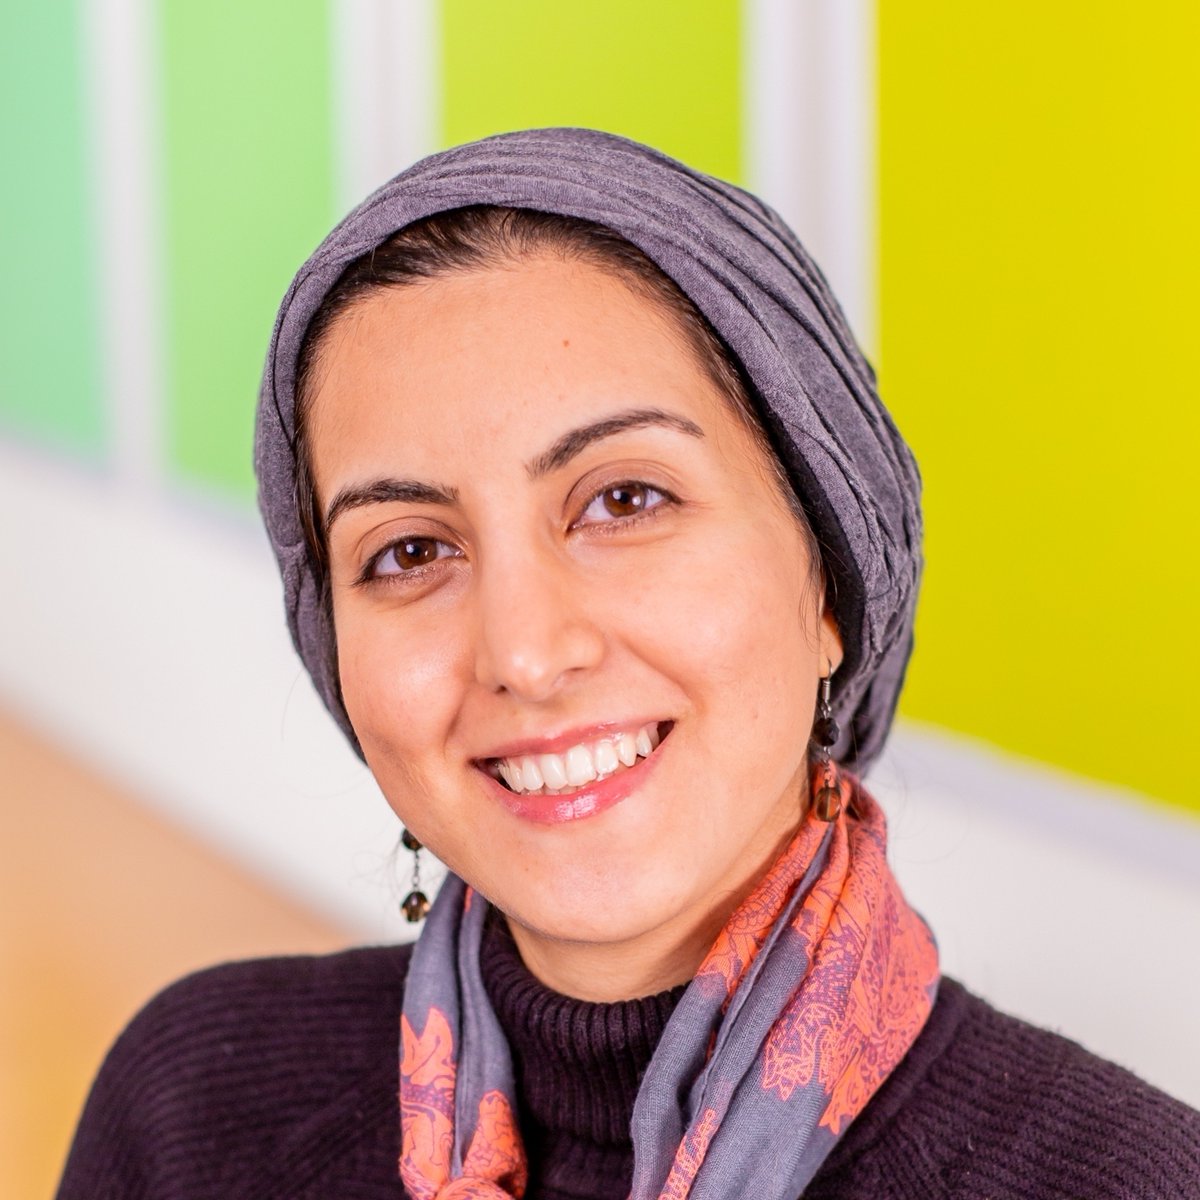 'The heart is constantly interacting with the brain, shaping our perceptual experience including the sense of time.' Read about @CornellCHE @CornellPsychDpt doctoral candidate Saeedeh Sadeghi: gradschool.cornell.edu/spotlights/stu…